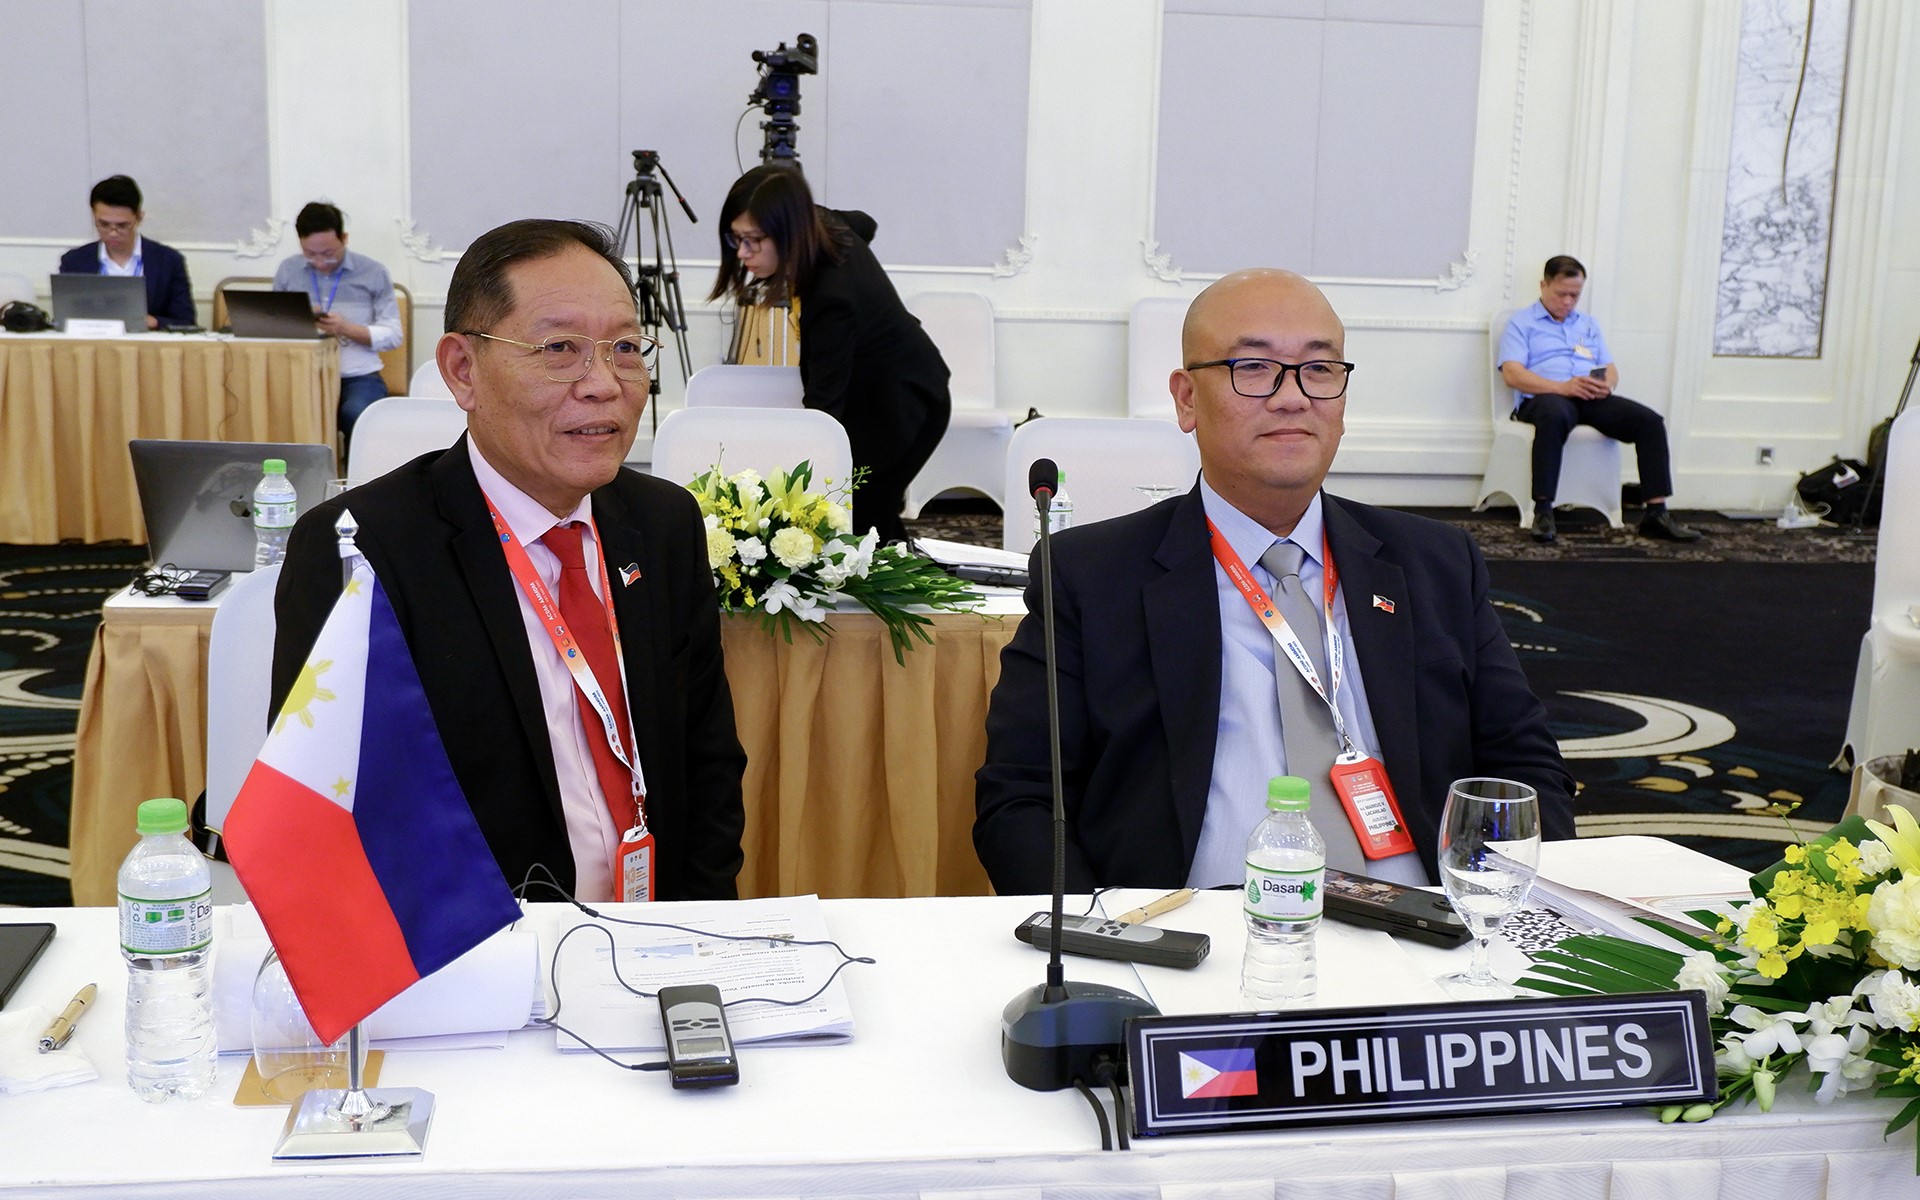 The Philippine delegates attended the meeting on natural disaster management. Photo: Bao Thang.